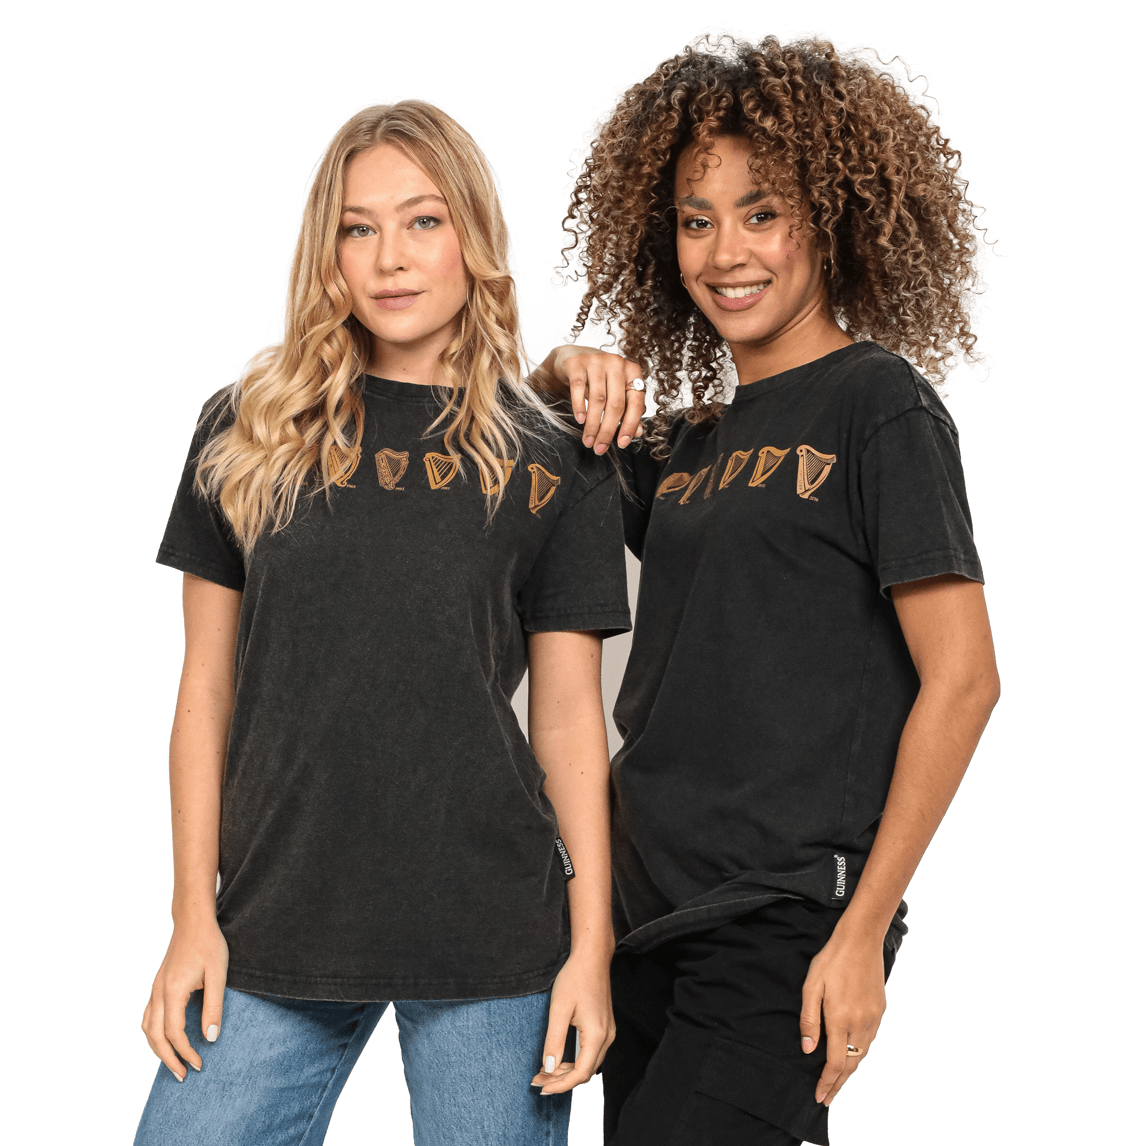 Two women wearing cotton black t-shirts, one of which is the Guinness UK Evolution Harp Tee.